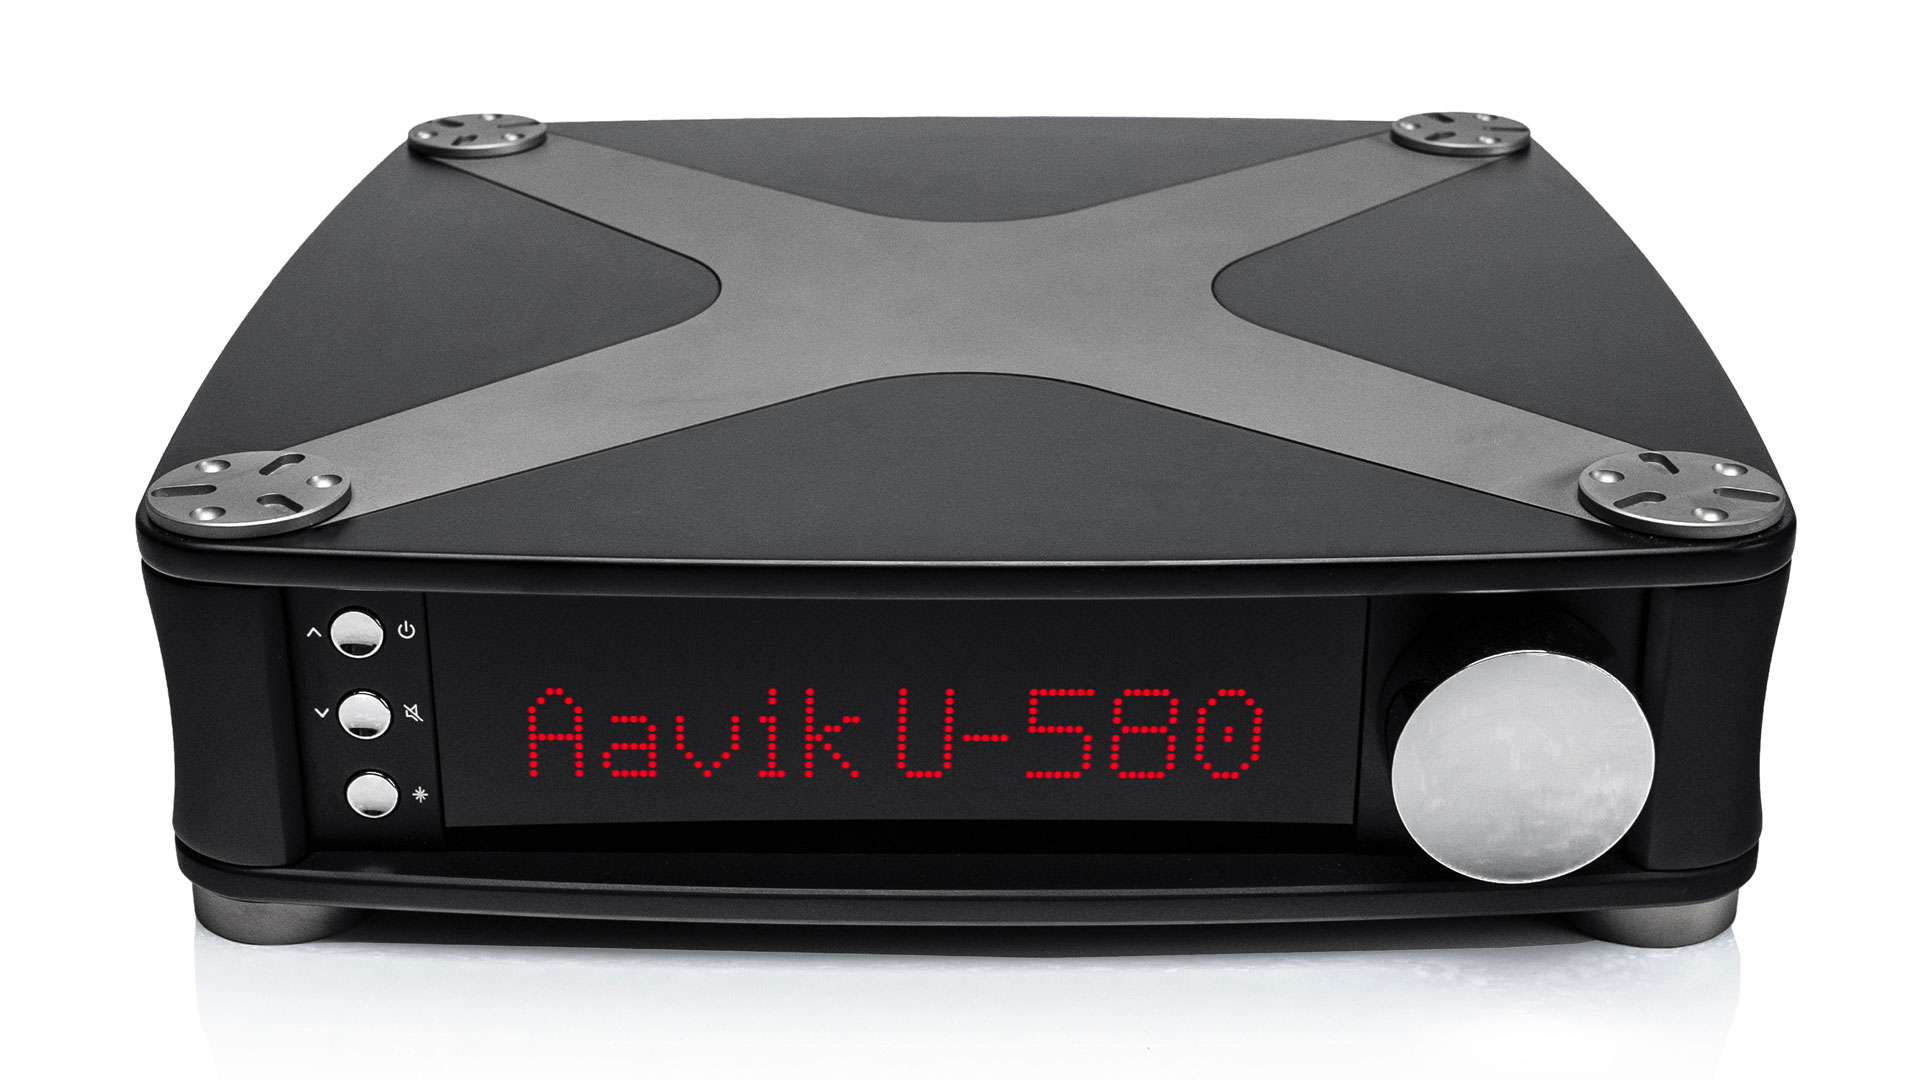 The new DAC-Amplifier U-580 from Aavik (Image Credit: Aavik)